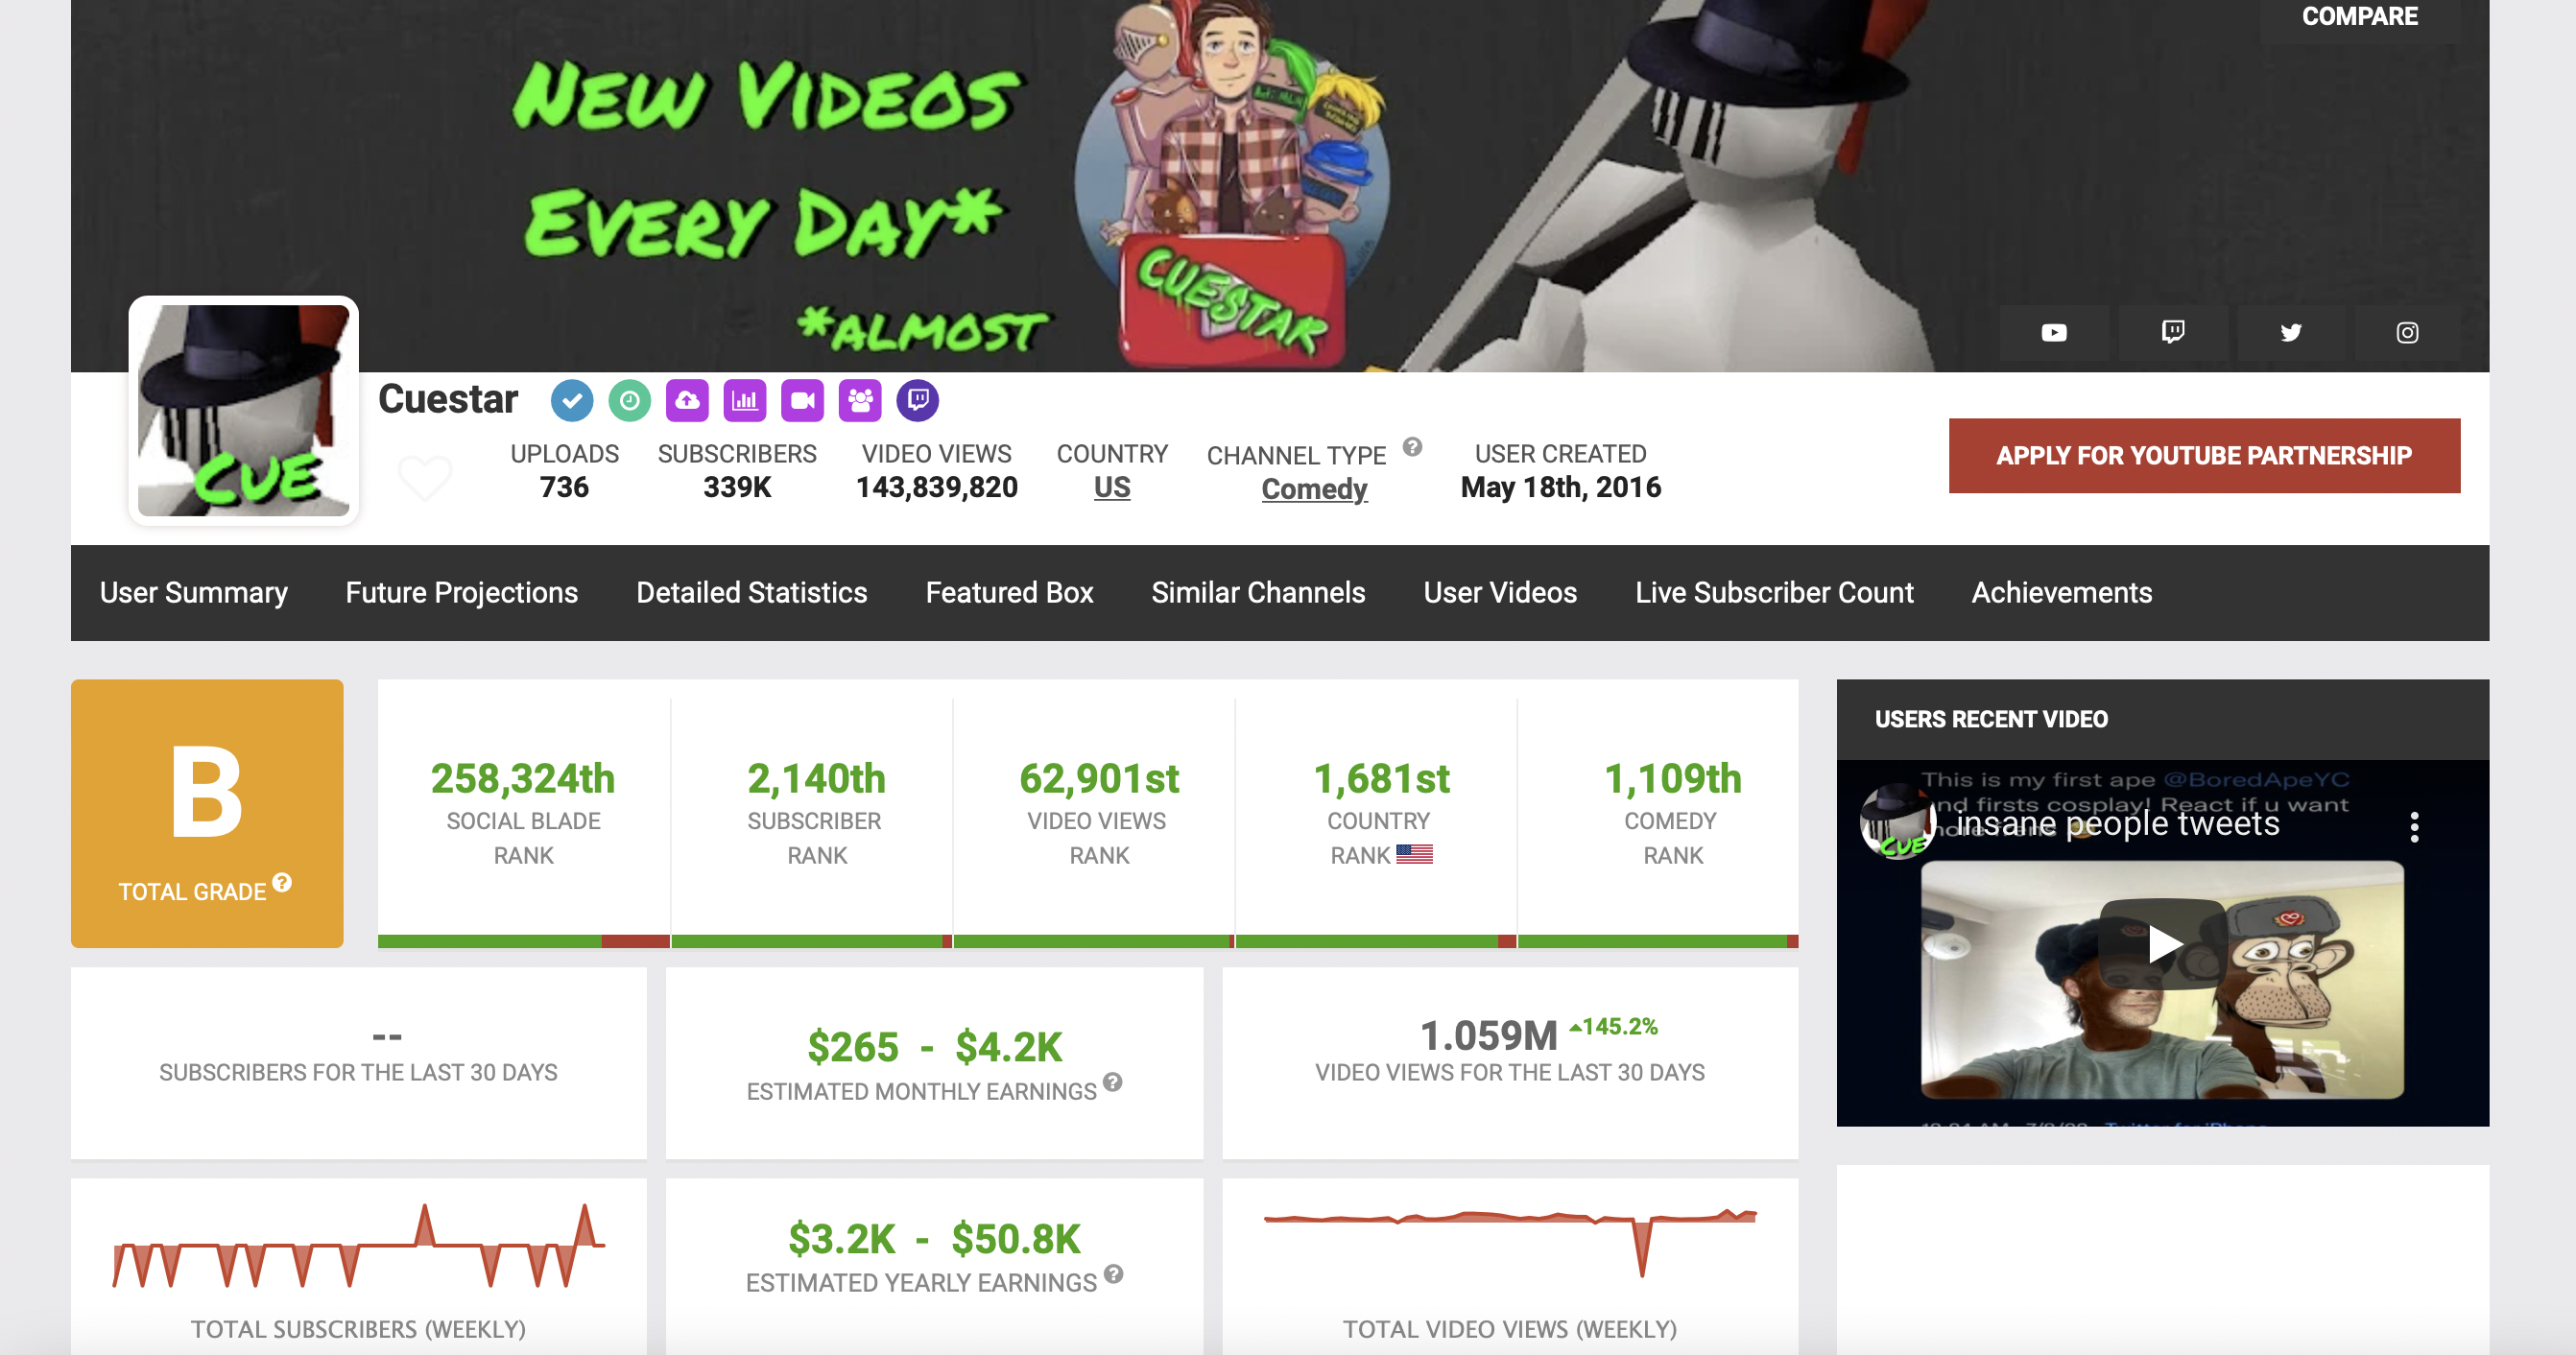 social blade analytics report for cuestar's YouTube channel